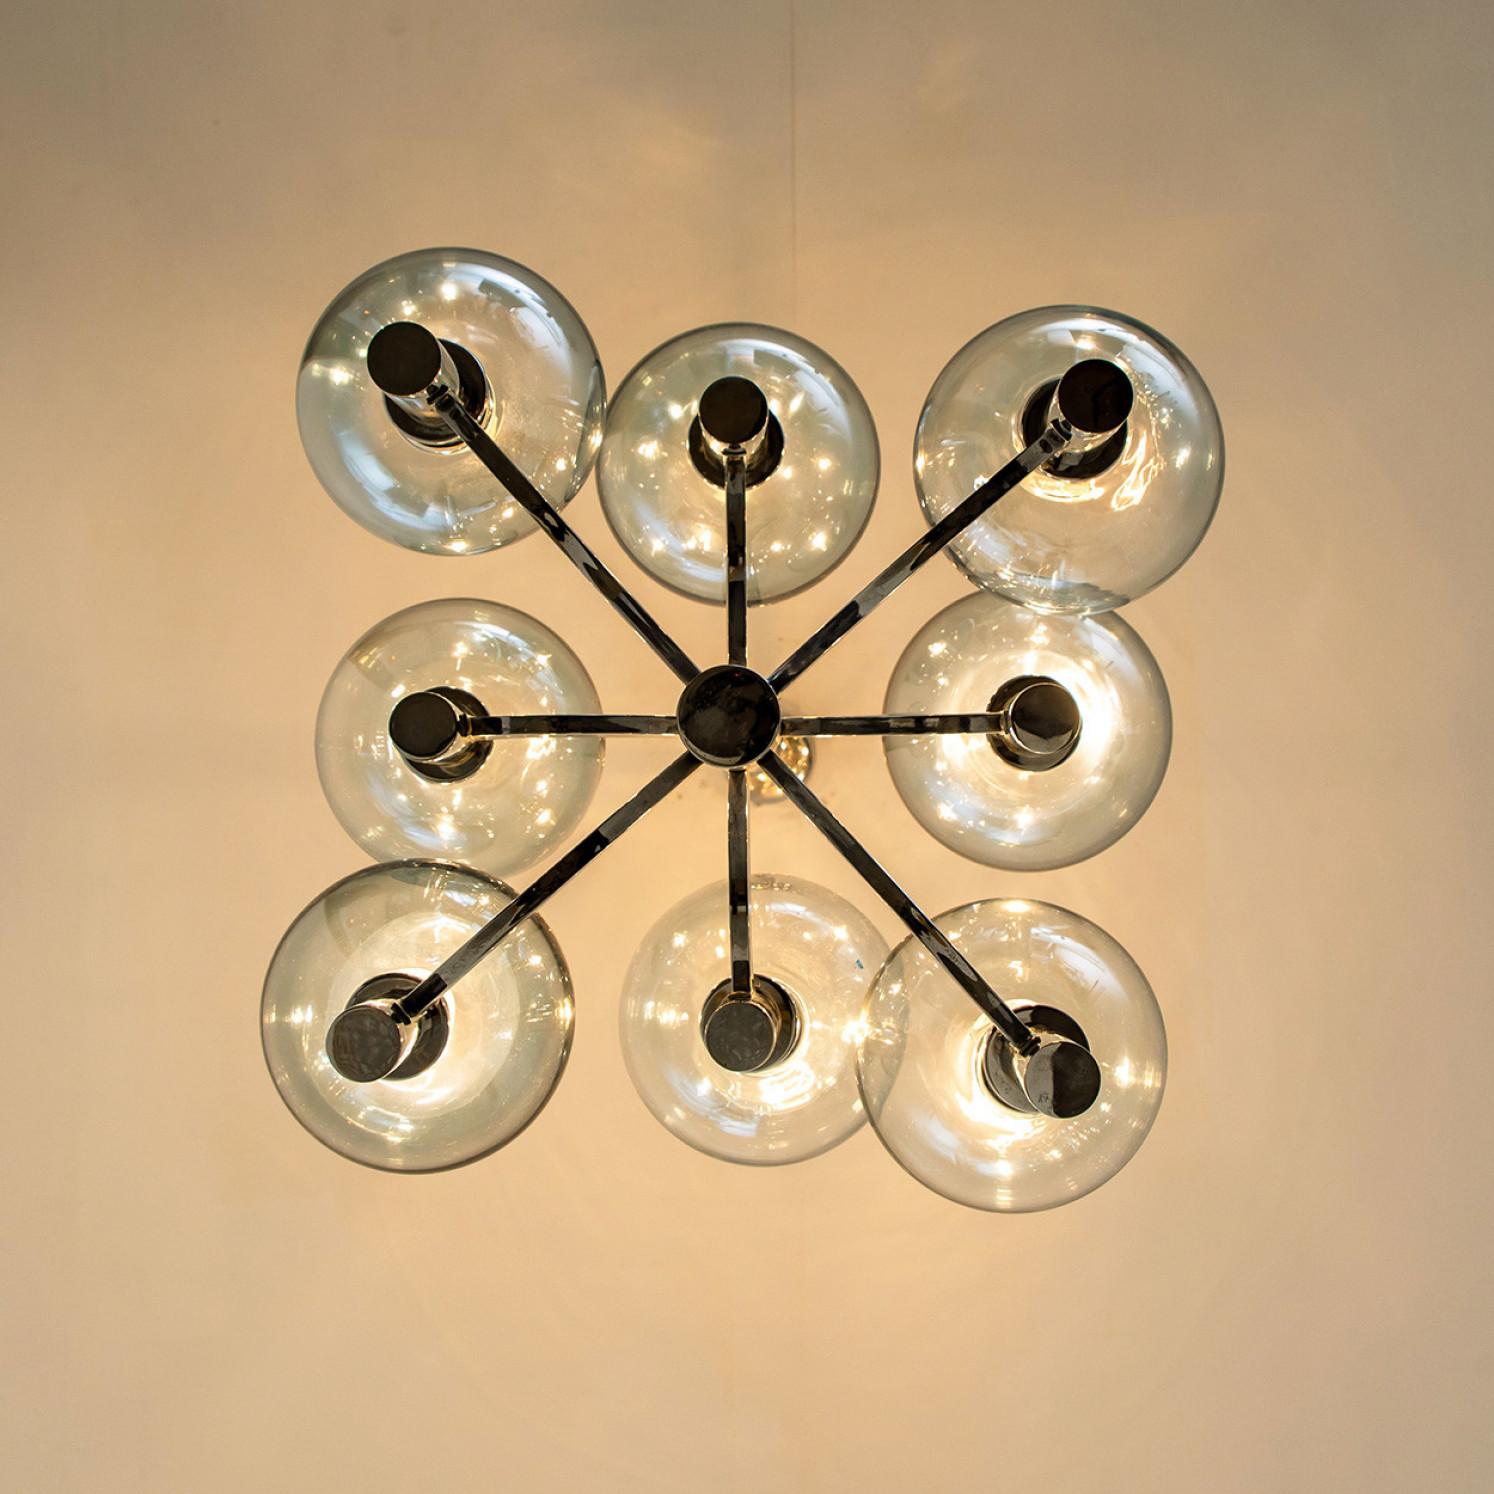 Chrome and Light Blue Glass Chandelier in the style of Arne Jakobsson, 1970s For Sale 5